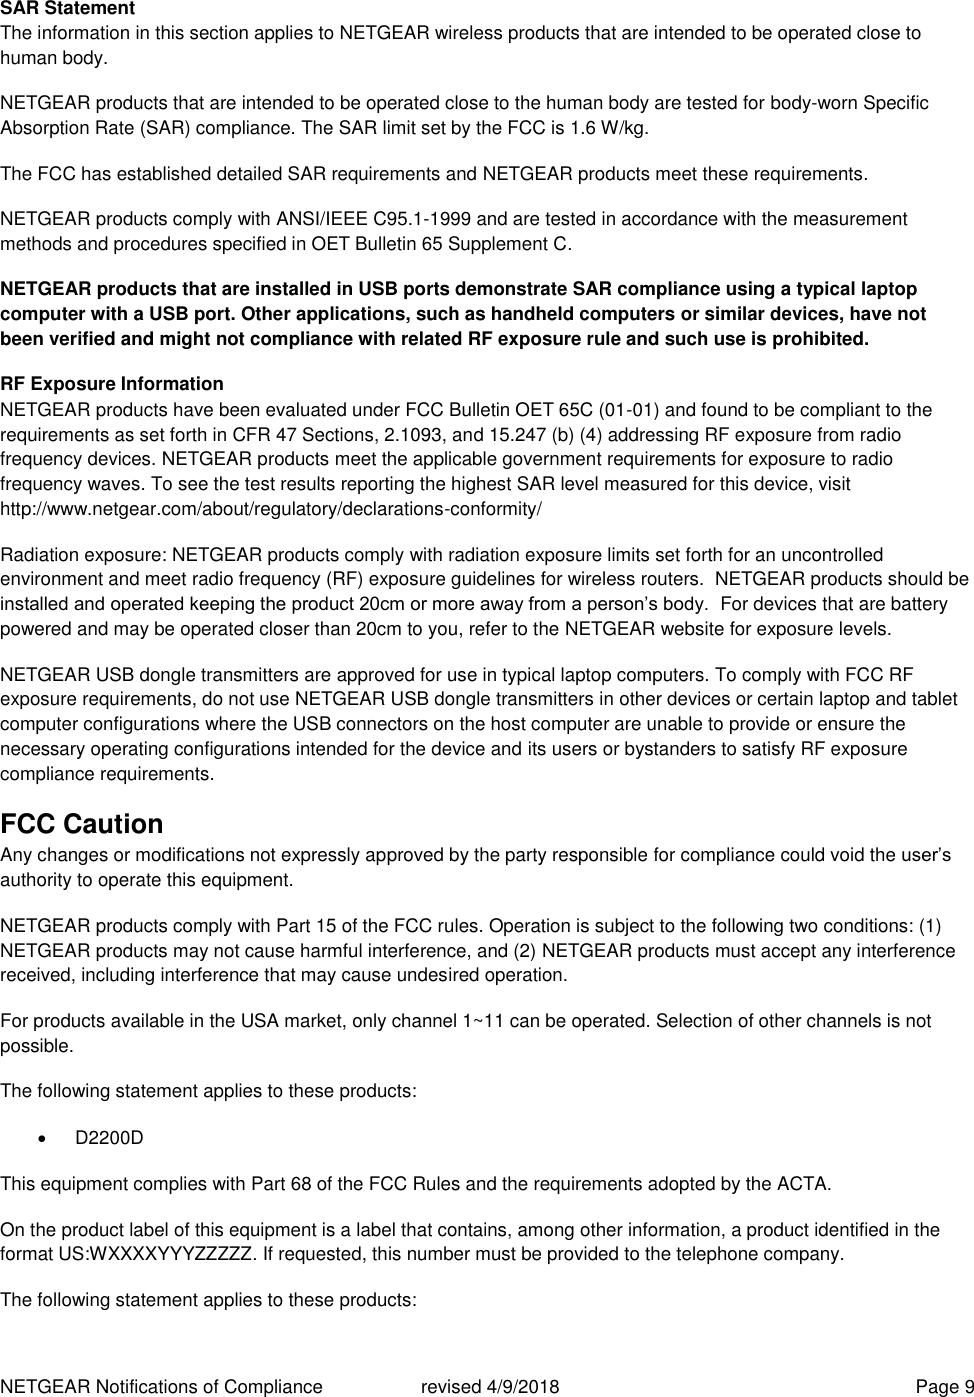 NETGEAR Notifications of Compliance    revised 4/9/2018  Page 9 SAR Statement The information in this section applies to NETGEAR wireless products that are intended to be operated close to human body.  NETGEAR products that are intended to be operated close to the human body are tested for body-worn Specific Absorption Rate (SAR) compliance. The SAR limit set by the FCC is 1.6 W/kg. The FCC has established detailed SAR requirements and NETGEAR products meet these requirements. NETGEAR products comply with ANSI/IEEE C95.1-1999 and are tested in accordance with the measurement methods and procedures specified in OET Bulletin 65 Supplement C. NETGEAR products that are installed in USB ports demonstrate SAR compliance using a typical laptop computer with a USB port. Other applications, such as handheld computers or similar devices, have not been verified and might not compliance with related RF exposure rule and such use is prohibited. RF Exposure Information NETGEAR products have been evaluated under FCC Bulletin OET 65C (01-01) and found to be compliant to the requirements as set forth in CFR 47 Sections, 2.1093, and 15.247 (b) (4) addressing RF exposure from radio frequency devices. NETGEAR products meet the applicable government requirements for exposure to radio frequency waves. To see the test results reporting the highest SAR level measured for this device, visit http://www.netgear.com/about/regulatory/declarations-conformity/ Radiation exposure: NETGEAR products comply with radiation exposure limits set forth for an uncontrolled environment and meet radio frequency (RF) exposure guidelines for wireless routers.  NETGEAR products should be installed and operated keeping the product 20cm or more away from a person’s body.  For devices that are battery powered and may be operated closer than 20cm to you, refer to the NETGEAR website for exposure levels. NETGEAR USB dongle transmitters are approved for use in typical laptop computers. To comply with FCC RF exposure requirements, do not use NETGEAR USB dongle transmitters in other devices or certain laptop and tablet computer configurations where the USB connectors on the host computer are unable to provide or ensure the necessary operating configurations intended for the device and its users or bystanders to satisfy RF exposure compliance requirements.    FCC Caution Any changes or modifications not expressly approved by the party responsible for compliance could void the user’s authority to operate this equipment. NETGEAR products comply with Part 15 of the FCC rules. Operation is subject to the following two conditions: (1) NETGEAR products may not cause harmful interference, and (2) NETGEAR products must accept any interference received, including interference that may cause undesired operation. For products available in the USA market, only channel 1~11 can be operated. Selection of other channels is not possible. The following statement applies to these products:   D2200D This equipment complies with Part 68 of the FCC Rules and the requirements adopted by the ACTA.  On the product label of this equipment is a label that contains, among other information, a product identified in the format US:WXXXXYYYZZZZZ. If requested, this number must be provided to the telephone company.  The following statement applies to these products: 